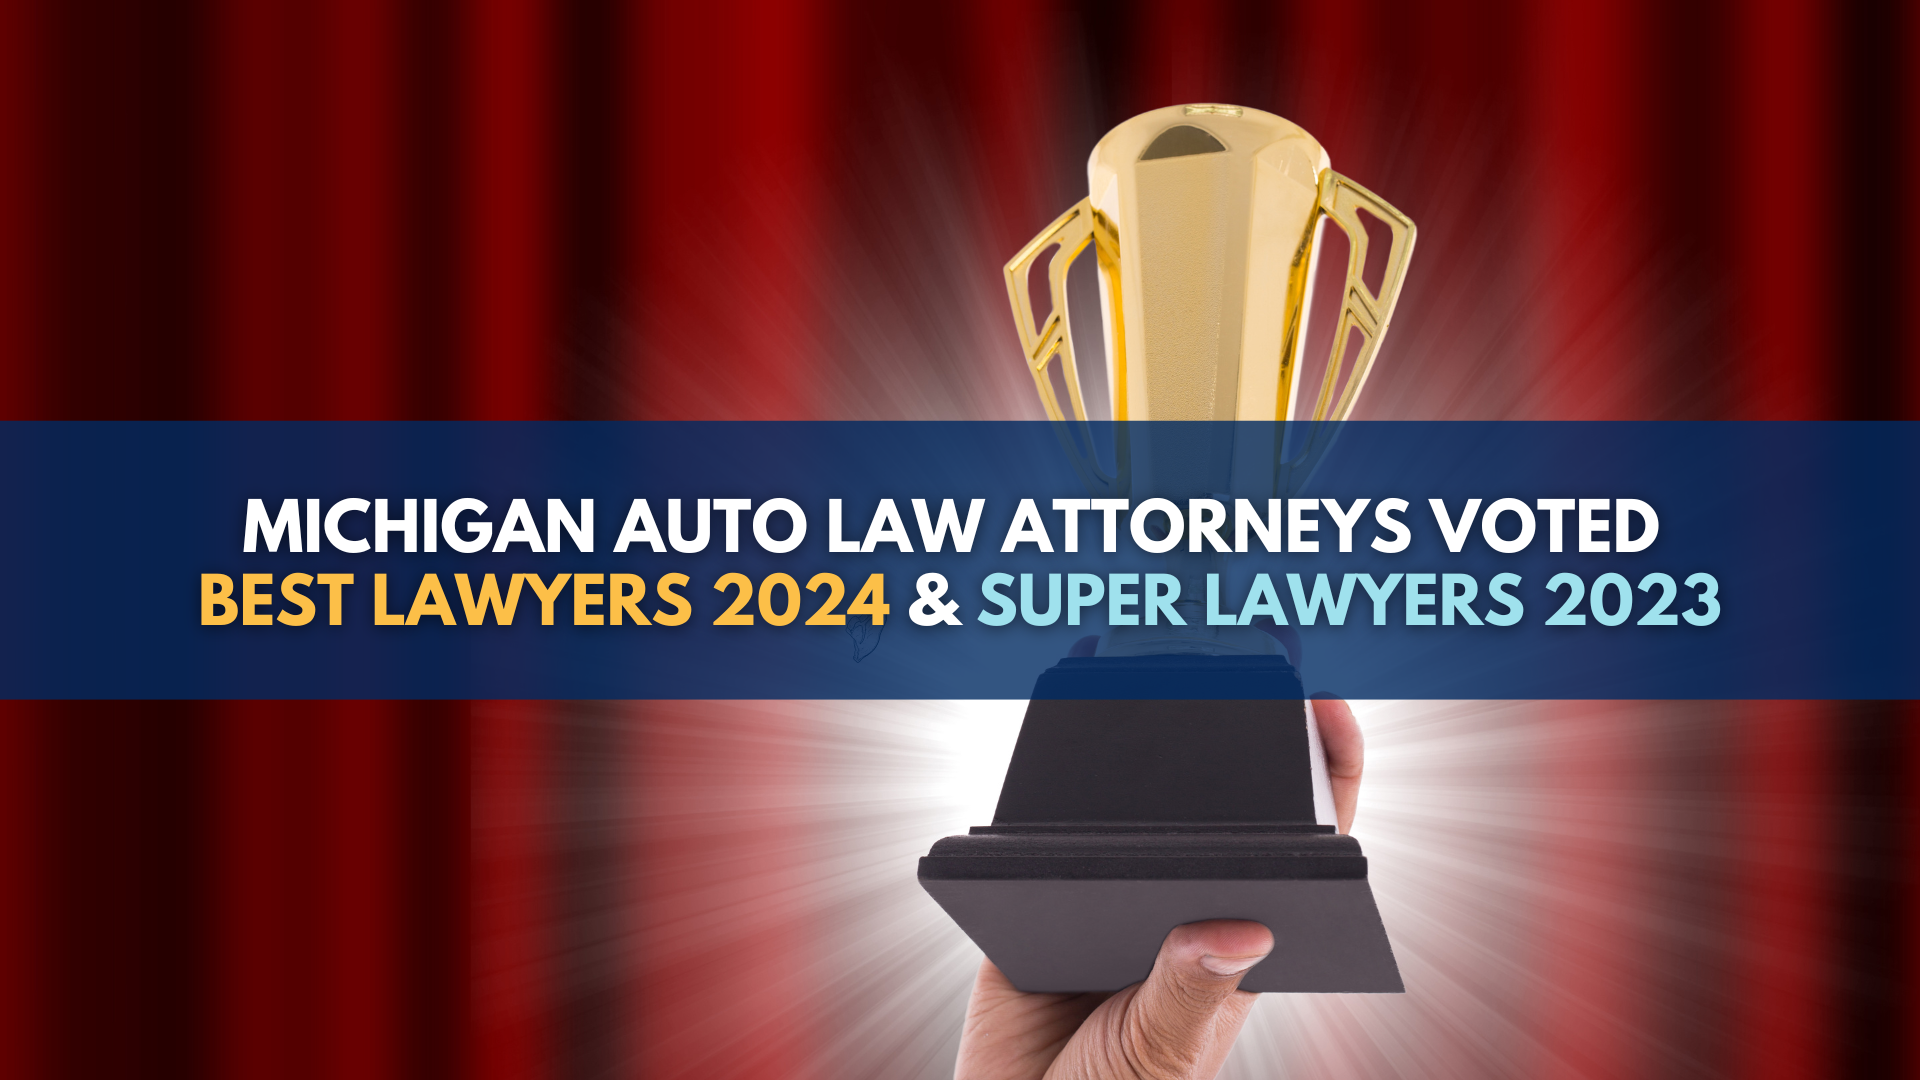 Voted Super Lawyers 2023 And Best Lawyers 2024